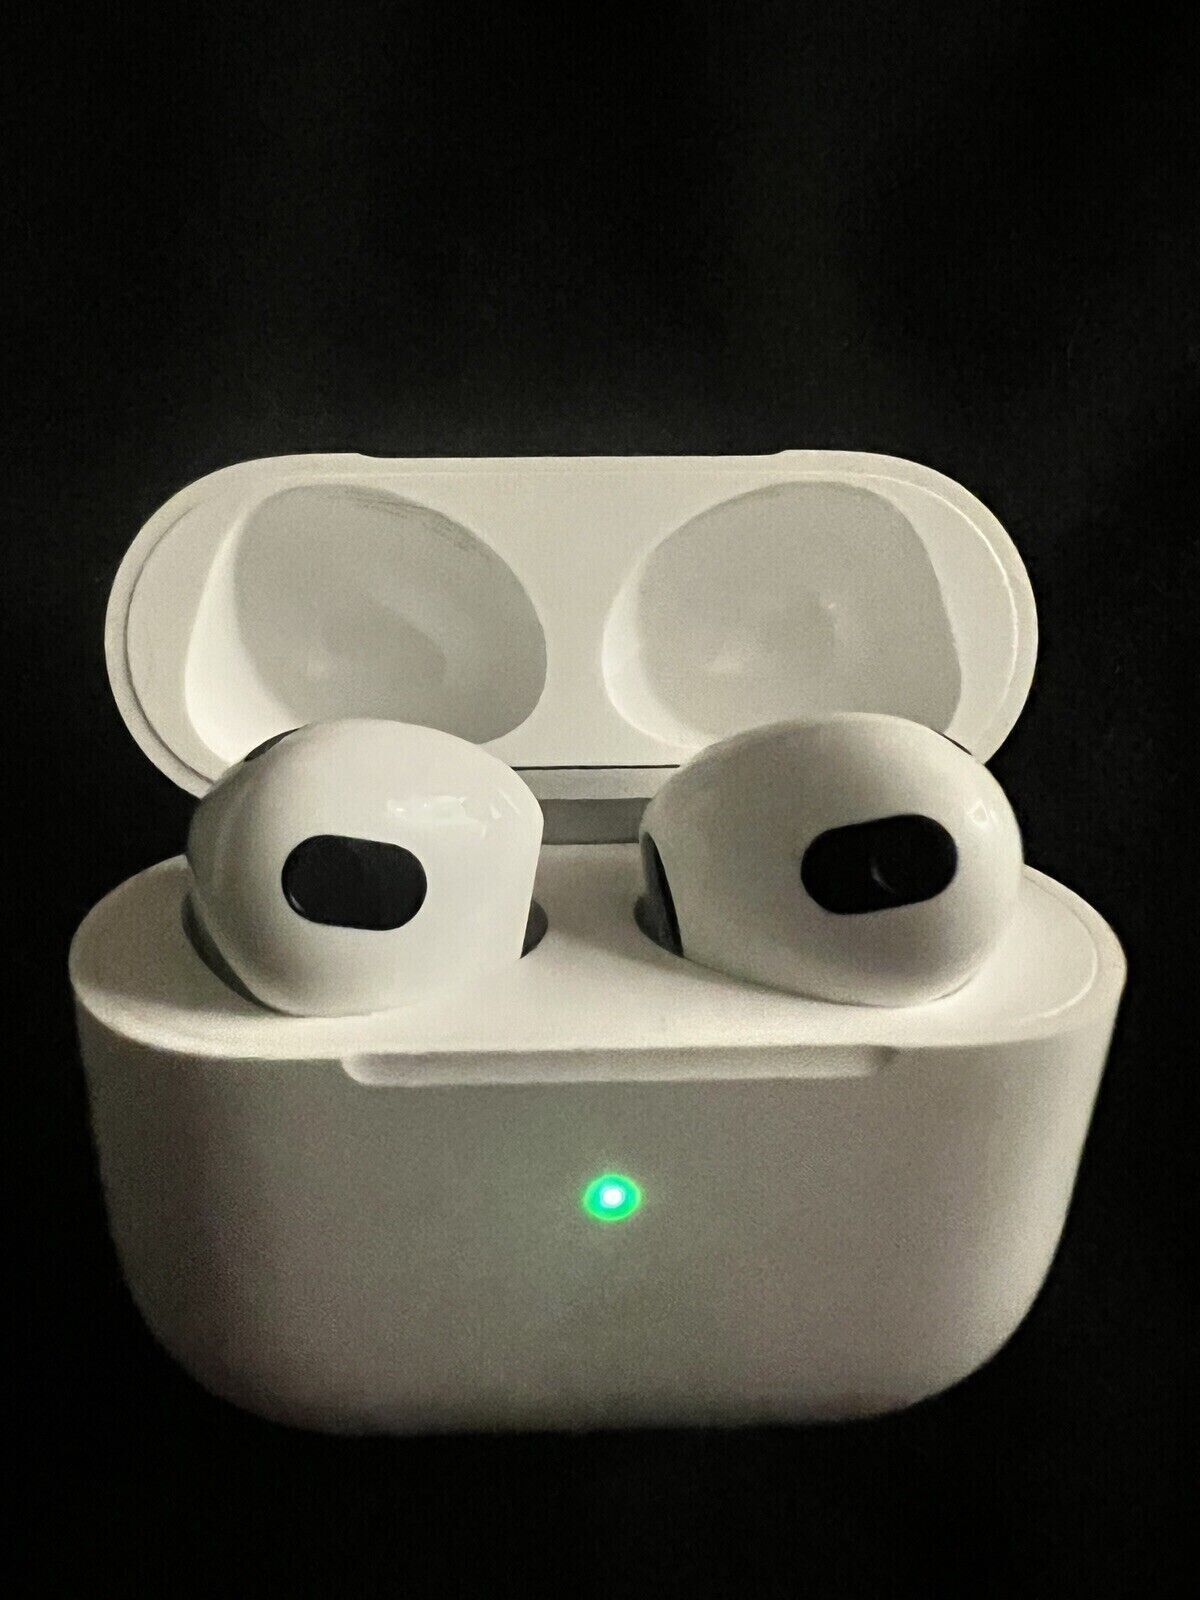 For Apple AirPods 3rd Generation Wireless In-Ear Headset - White